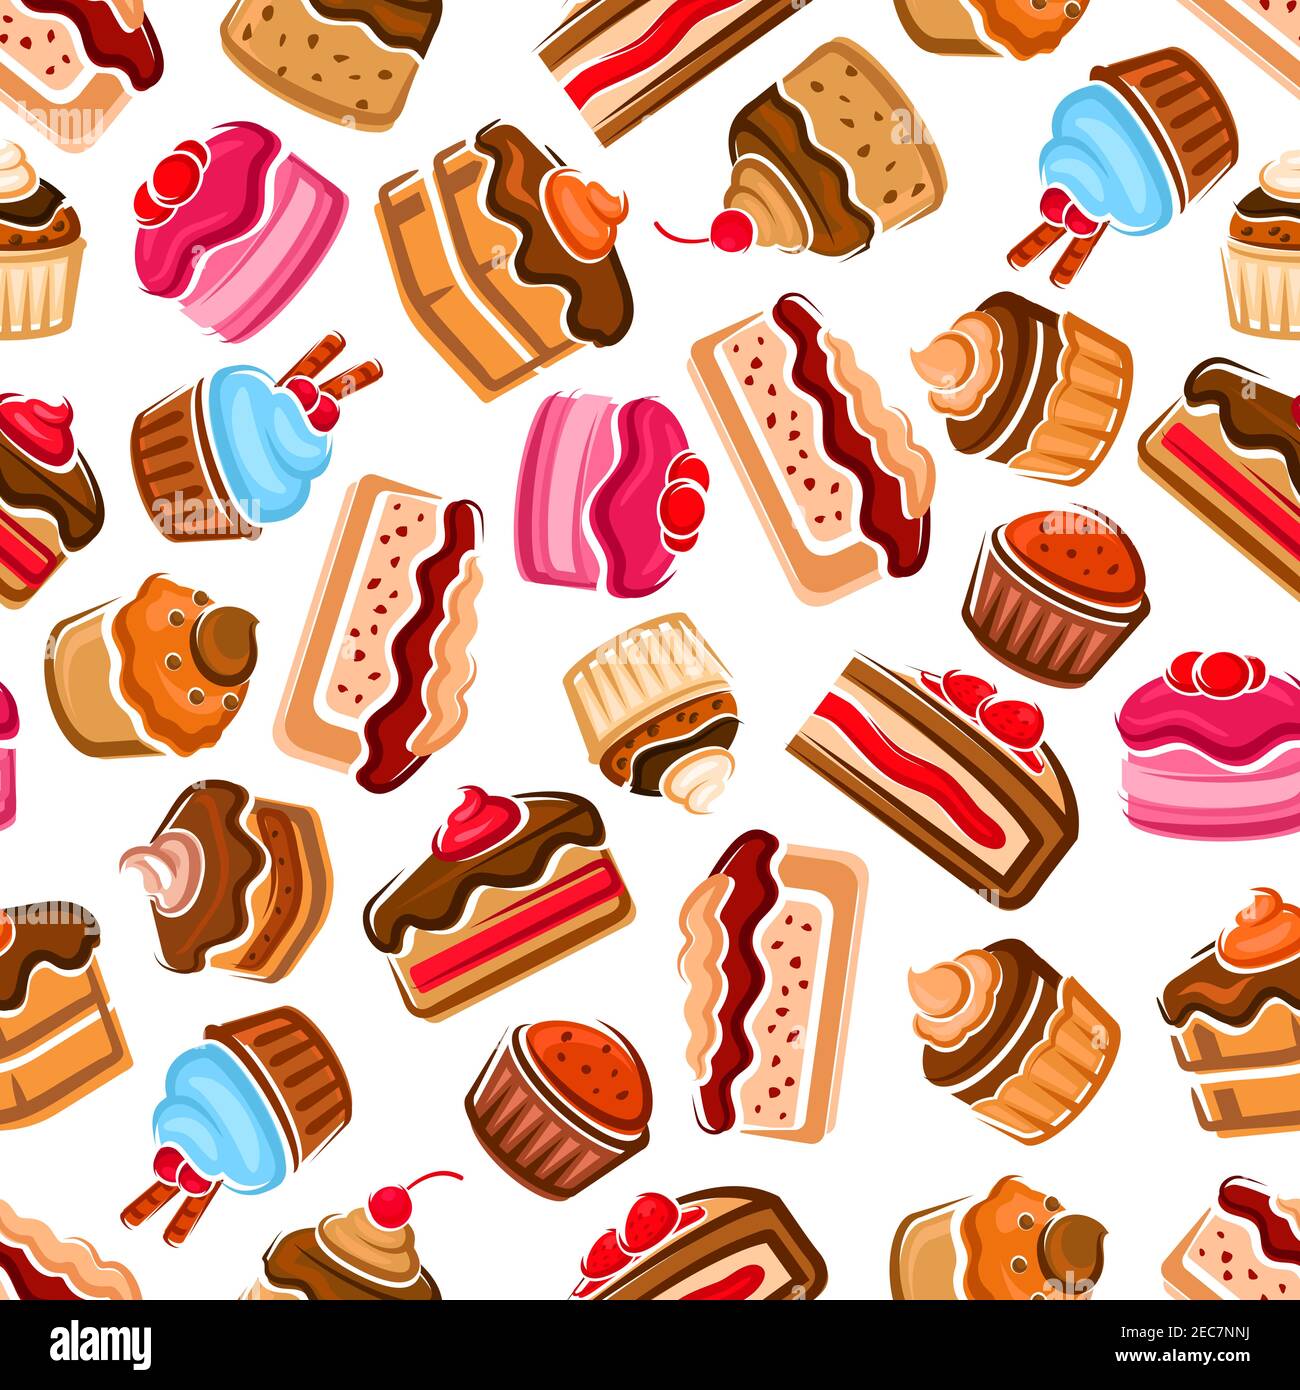 Cupcake Background Vector Art & Graphics | freevector.com